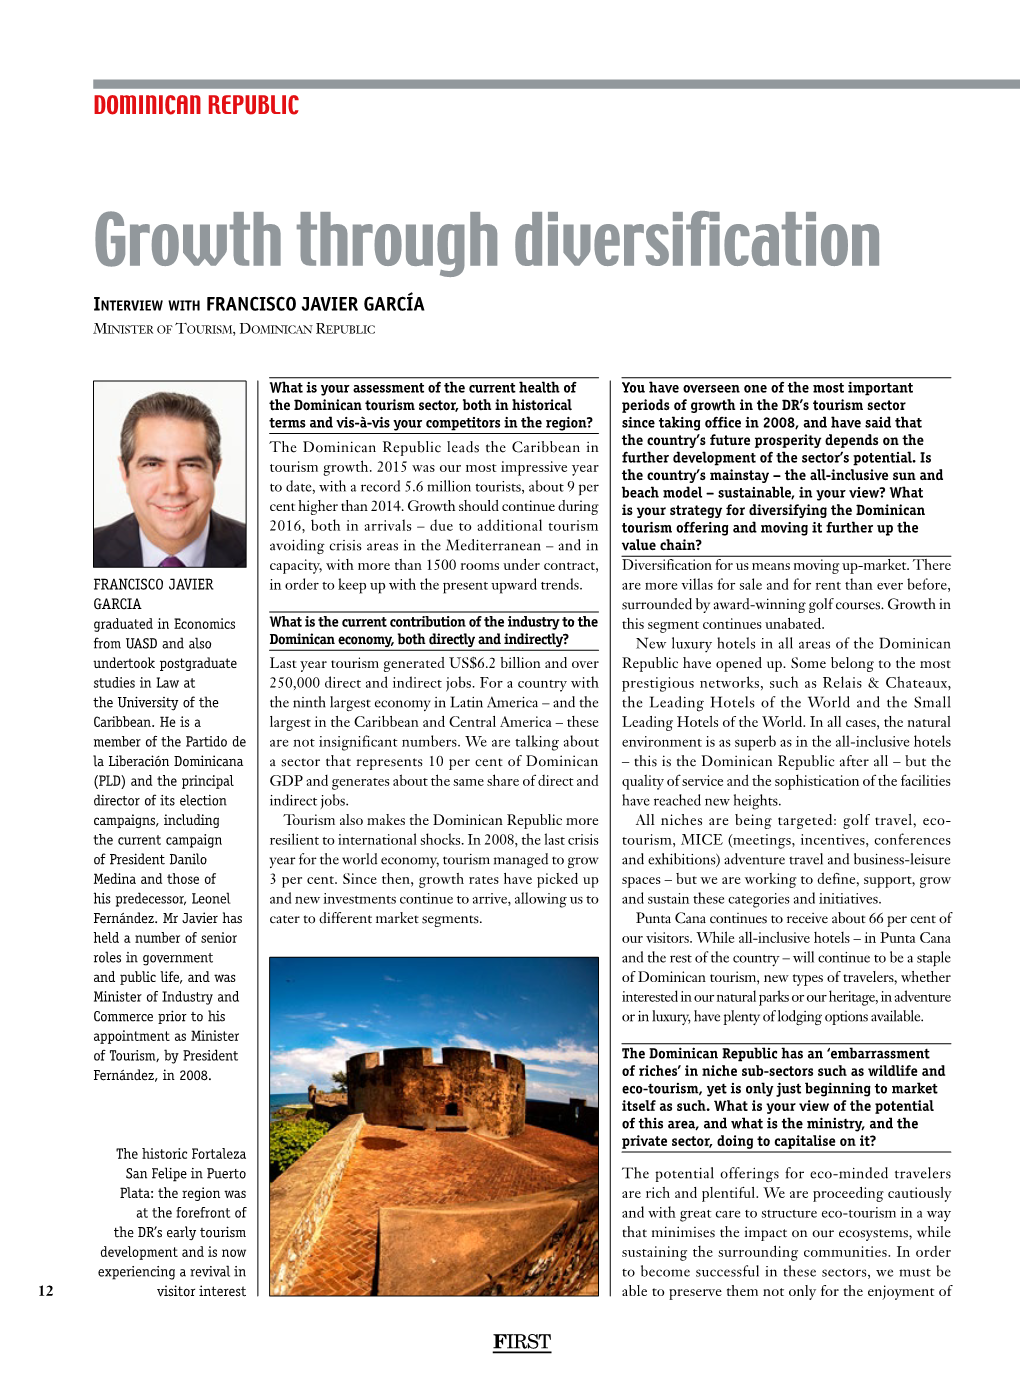 Growth Through Diversification Interview with FRANCISCO JAVIER GARCÍA Minister of Tourism, Dominican Republic